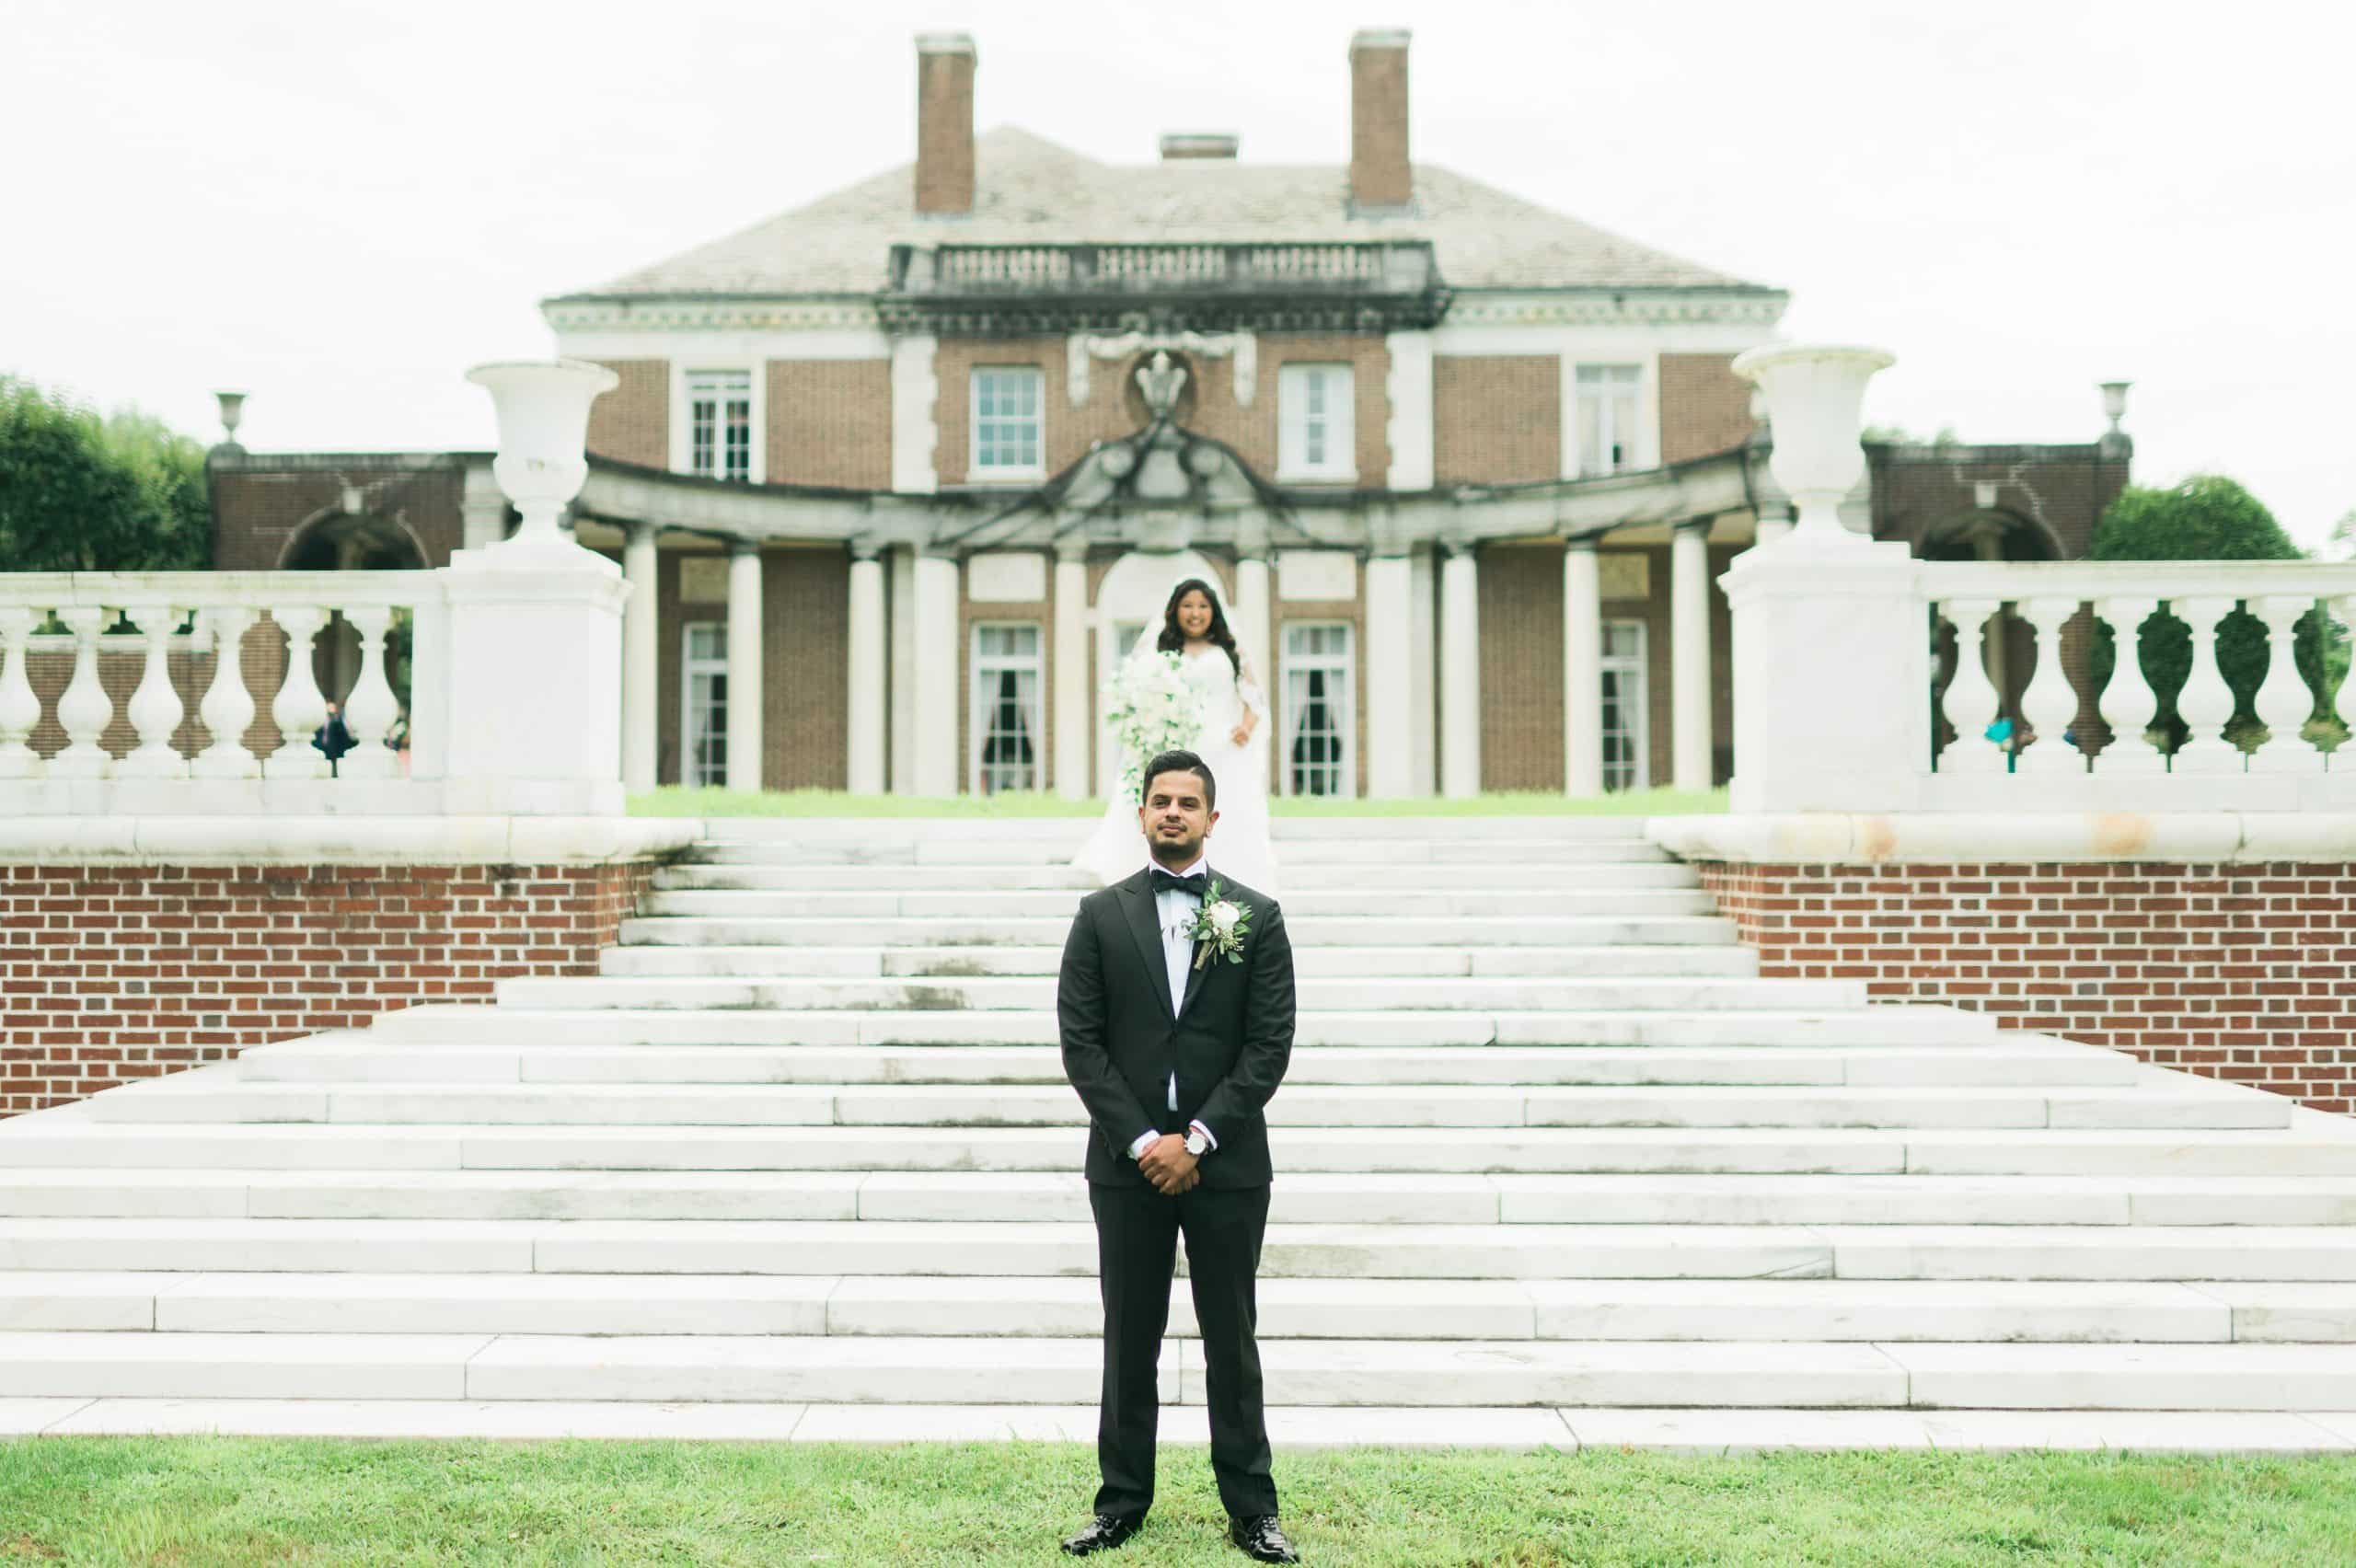 NYIT de Seversky Mansion wedding in Long Island, captured by Long Island photodocumentary wedding photographer Ben Lau.